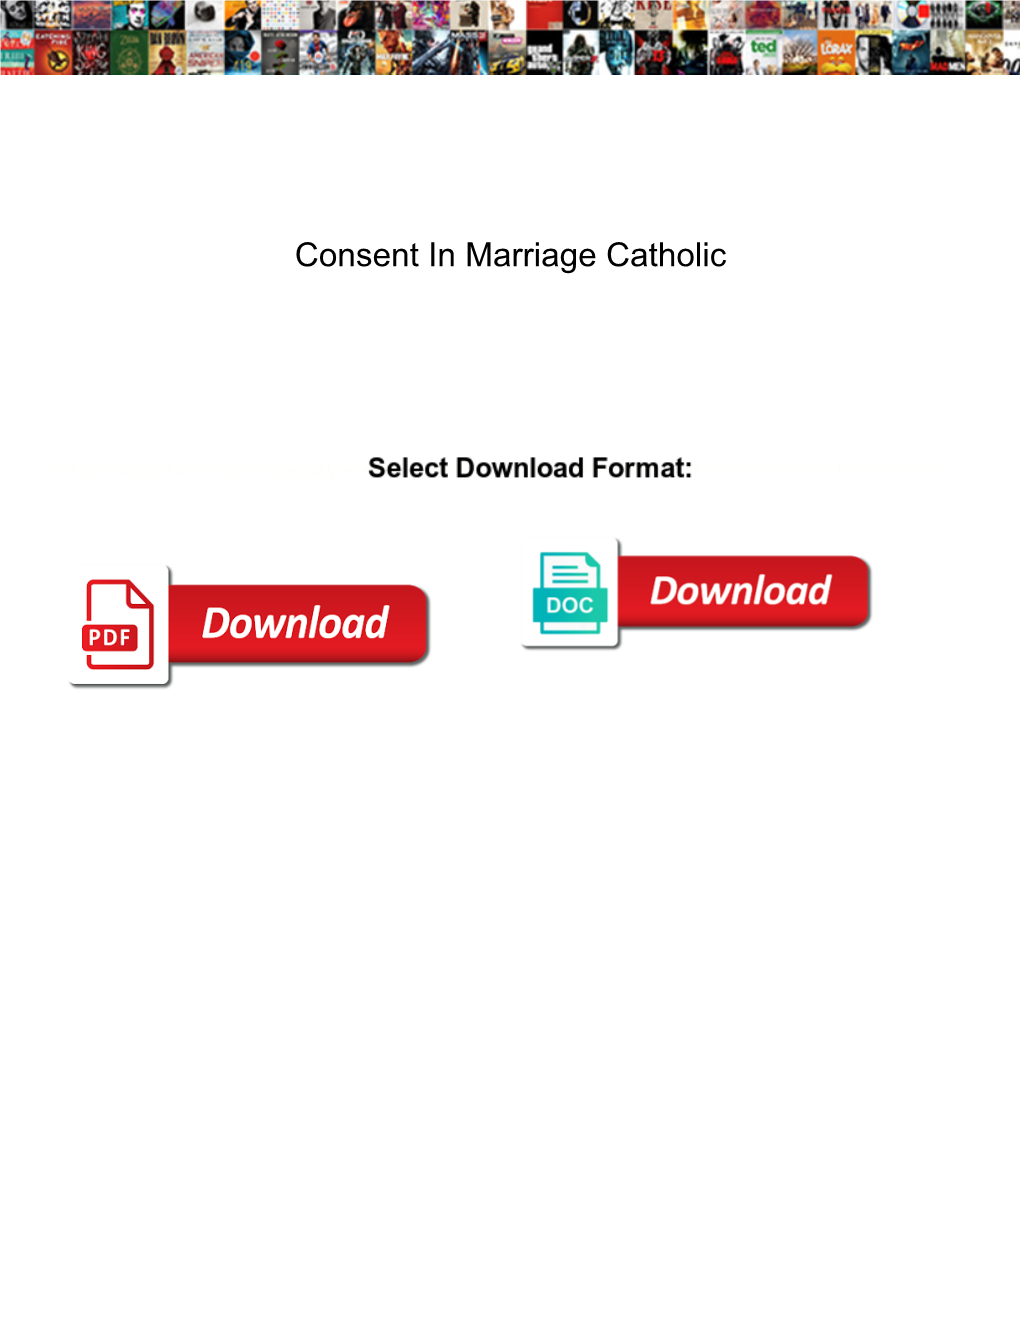 Consent in Marriage Catholic